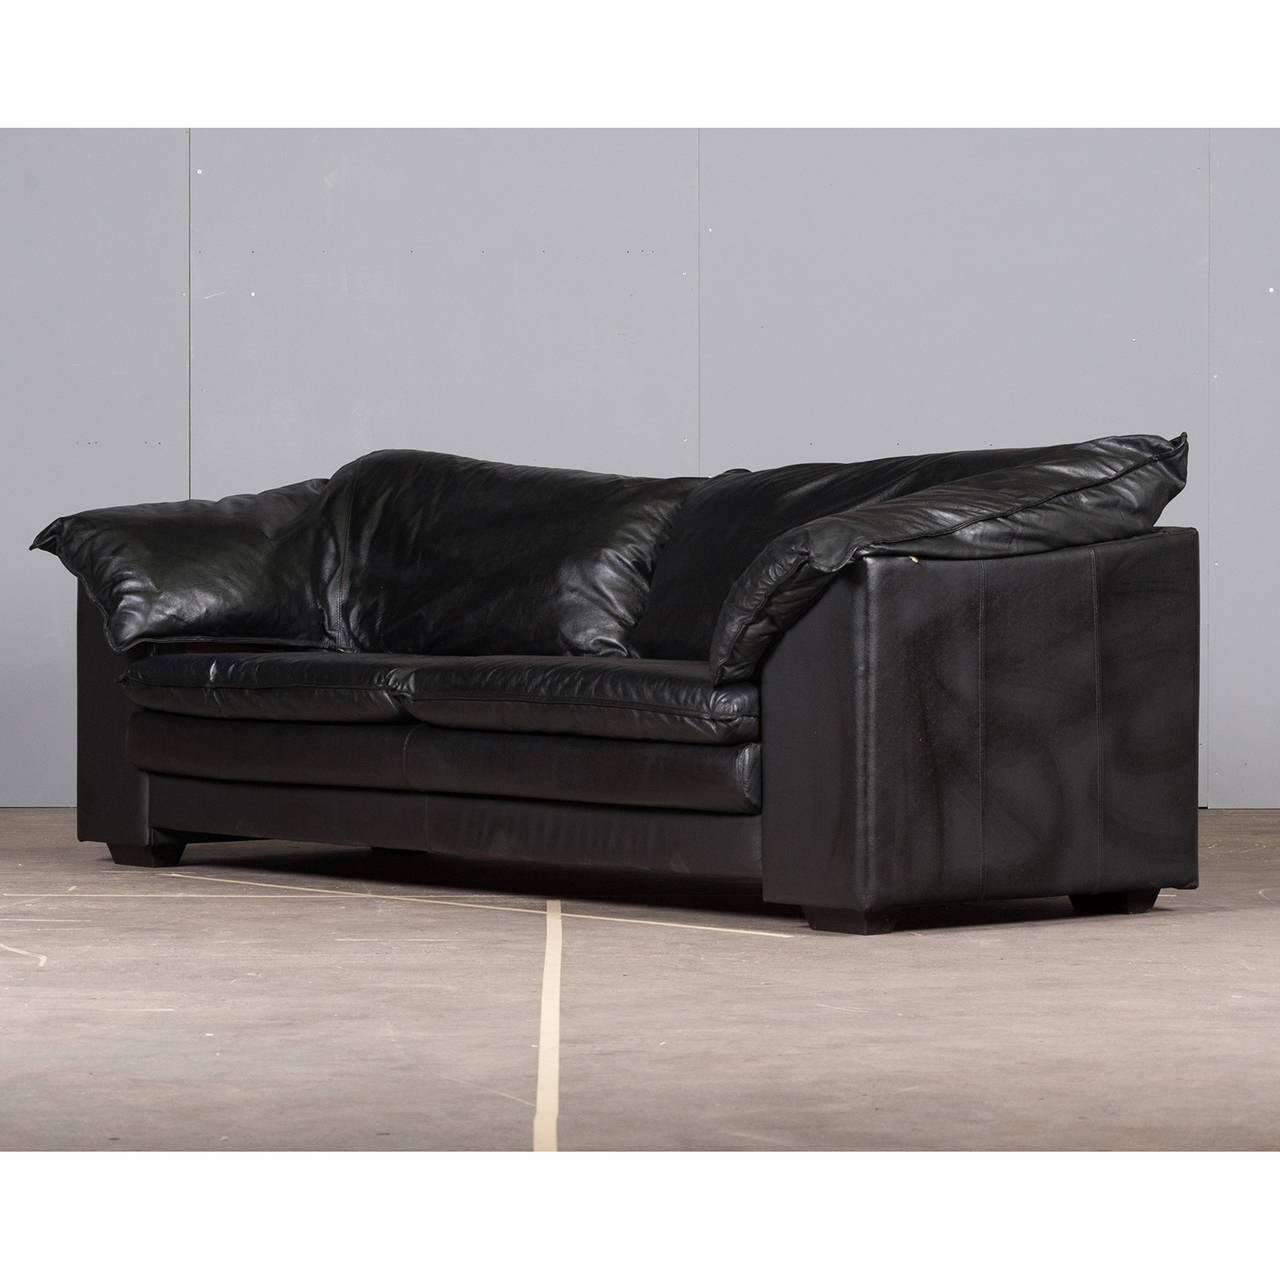 Fabulous Italian three-seater sofa in a rich black leather by Skalma. This is the best of 1980's style and comfort!

The oversized sofa features large, soft back cushions and armrests which fold in for a perfect level of relaxation. There is also